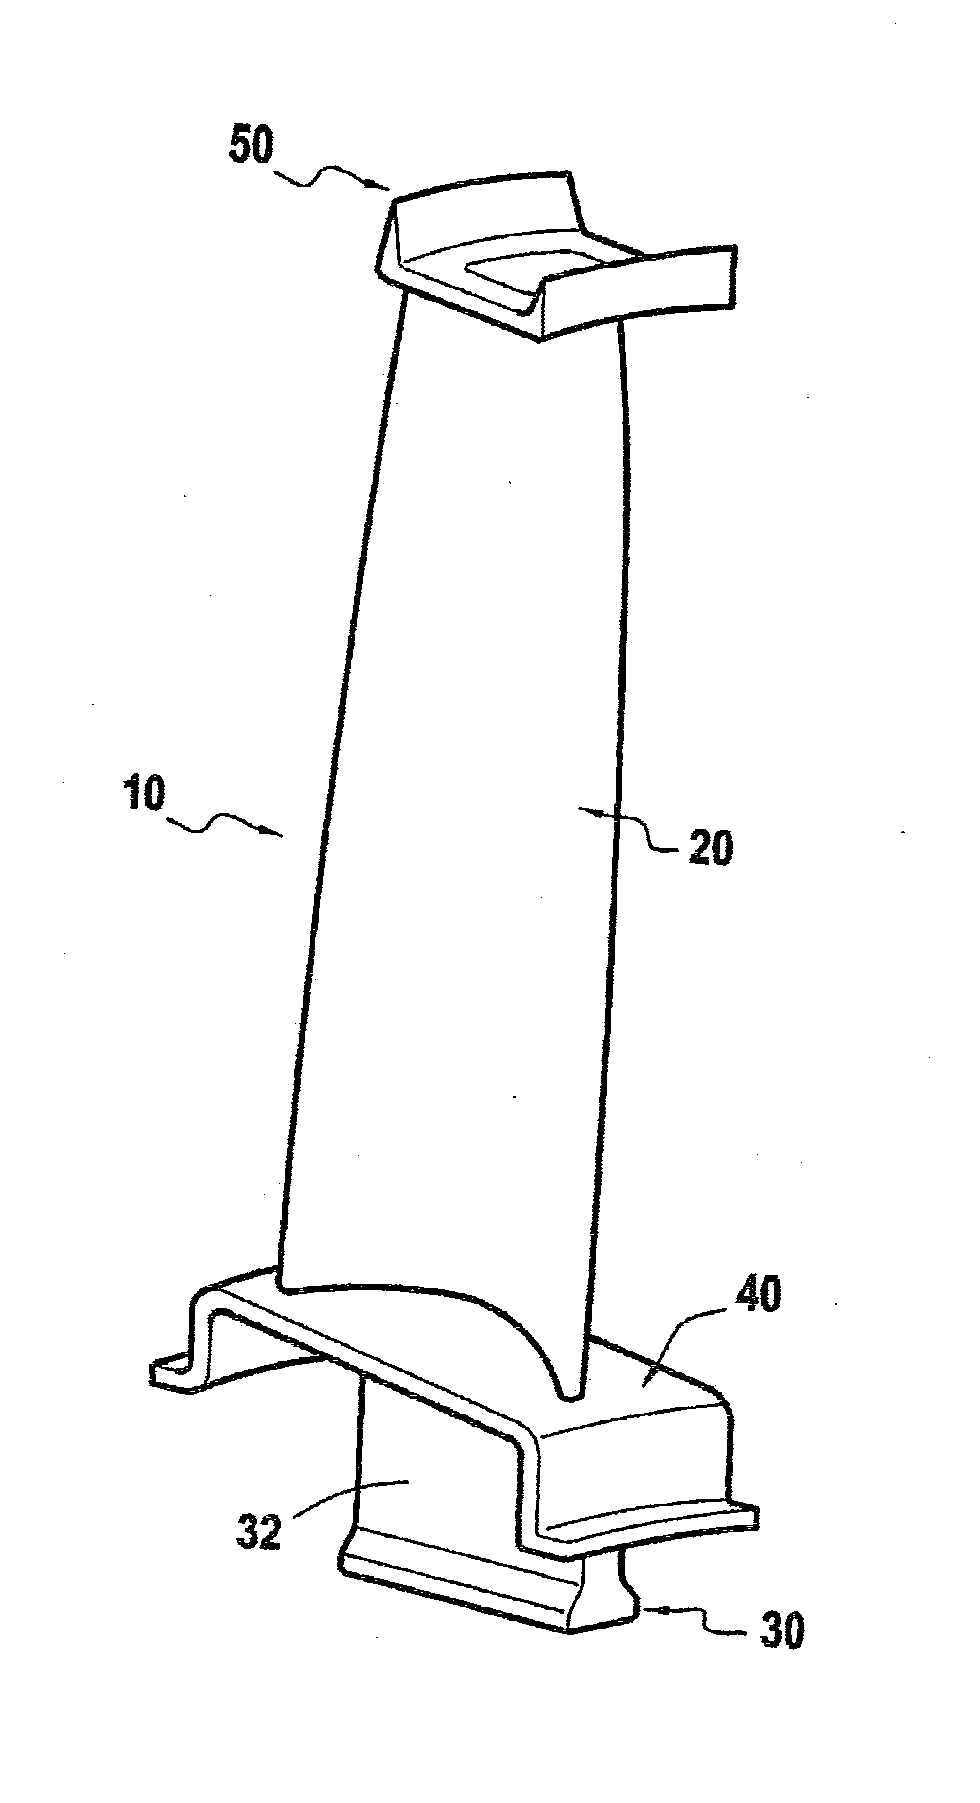 Process for smoothing the surface of a part made of cmc material